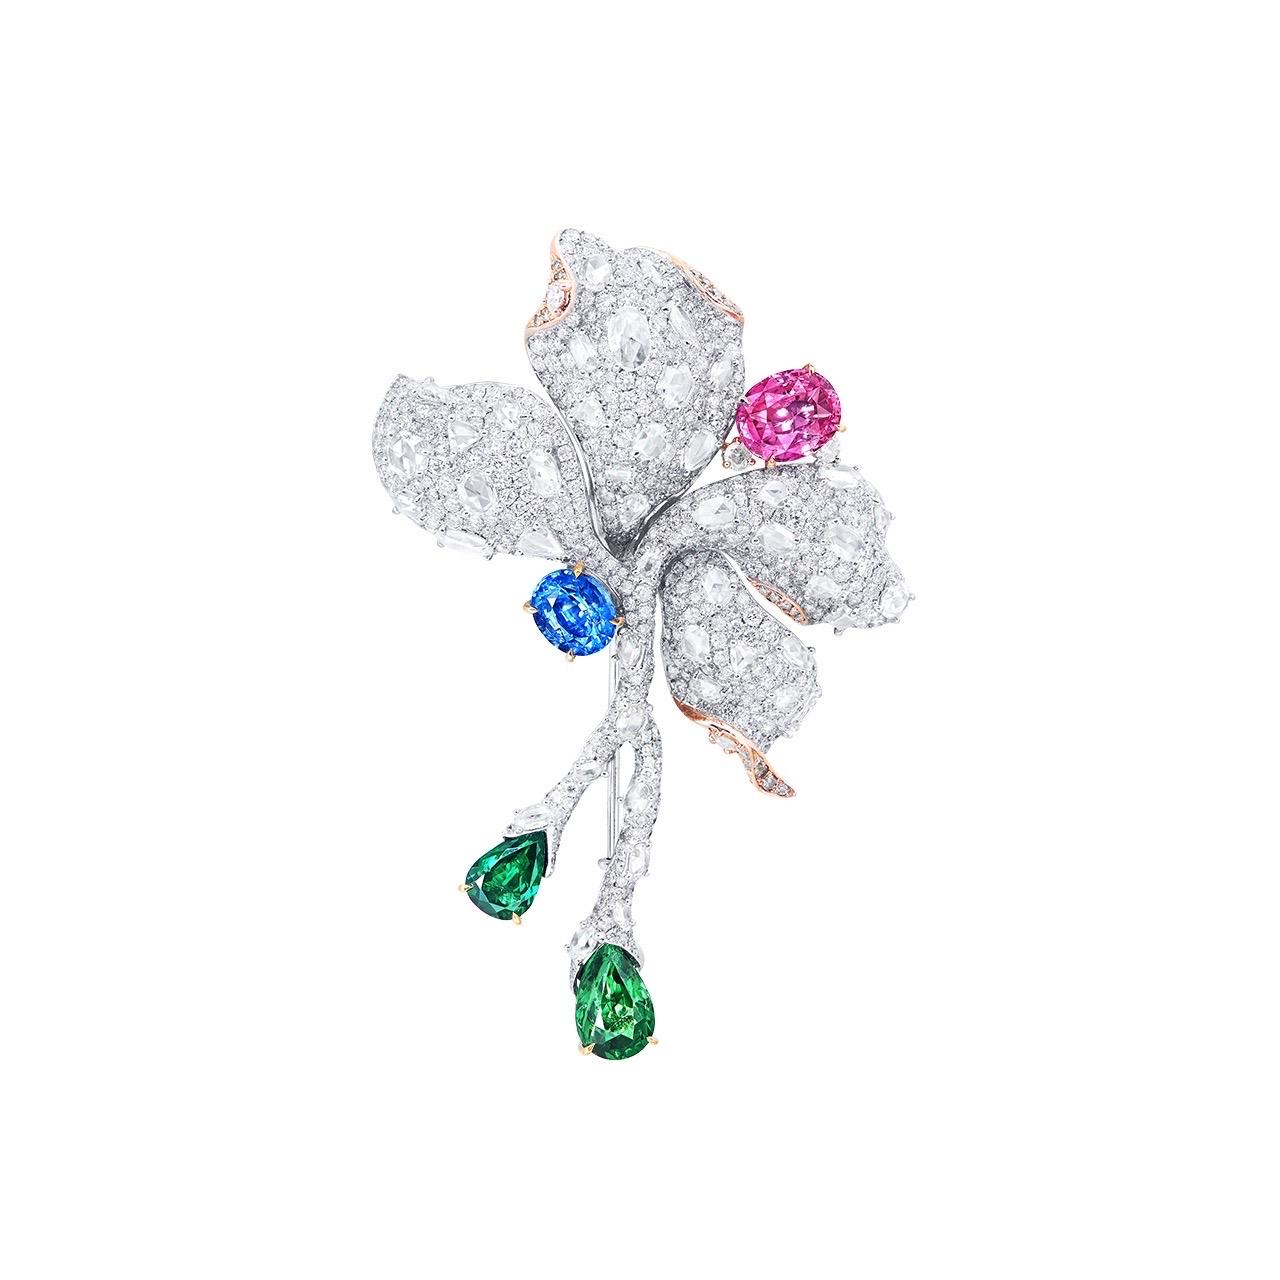 From the vault at Emilio Jewelry Located on New York's iconic 5th Avenue,
Main Stone: Sapphire over 1.70 carat Blue (Cornflower Blue), Pink 2.00 + carat, Tsavorite 1.11 carat, Tsavorite 2.16 carat
Matching: 232 white diamonds totaling about 1.20